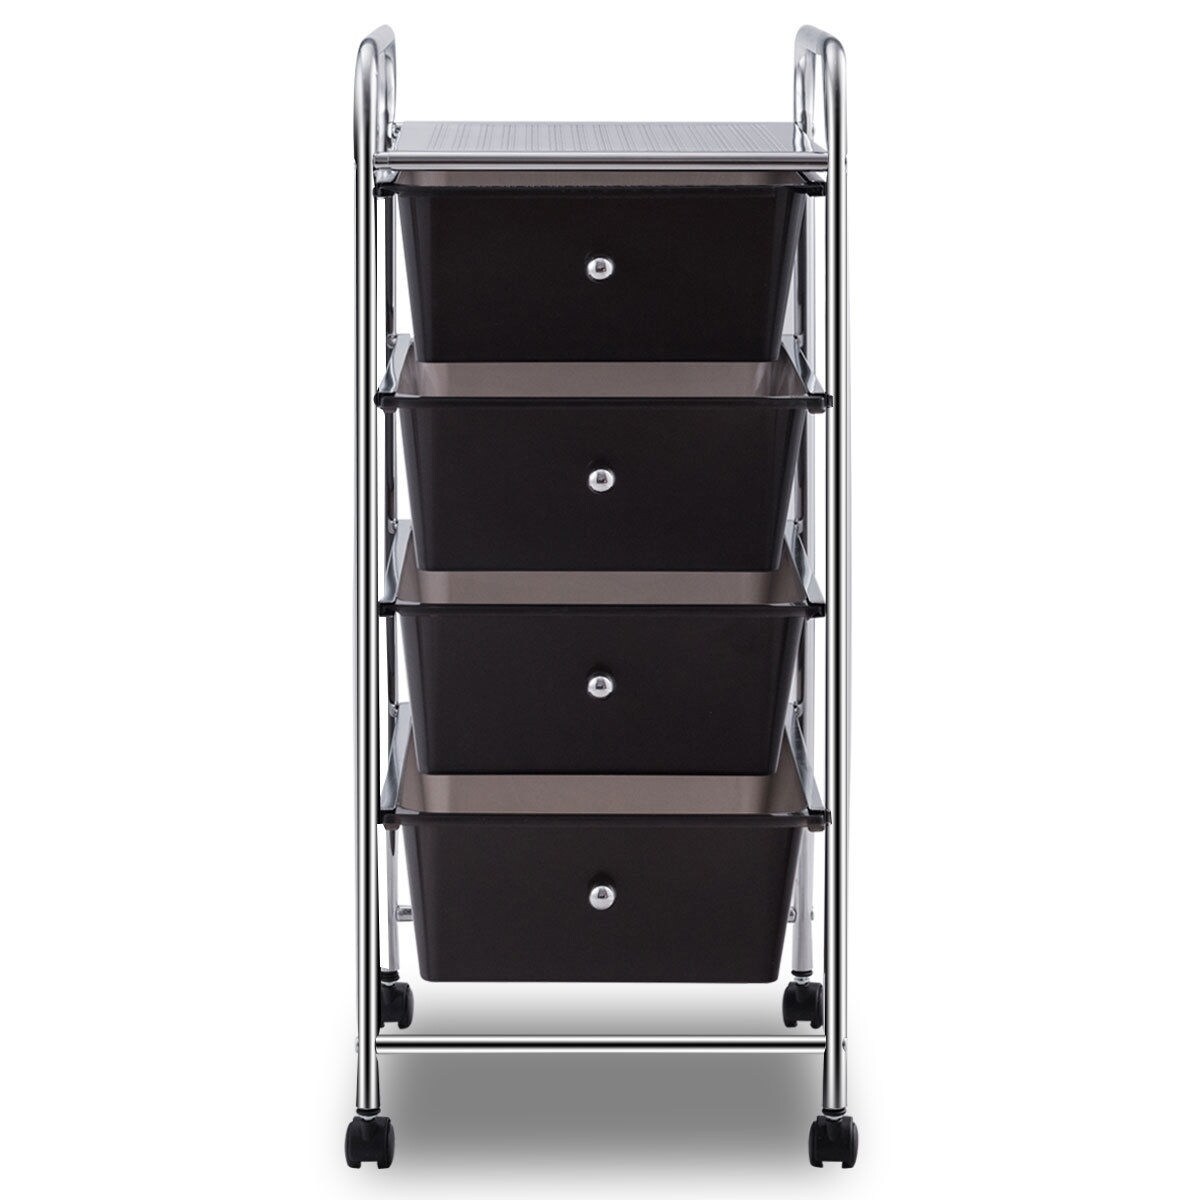 https://ak1.ostkcdn.com/images/products/is/images/direct/f10f076e7d1c6eec34cca06afd8eadb13b559cb2/Costway-4-Drawers-Metal-Rolling-Storage-Cart-Scrapbook-Supply-%26-Paper-Home-Office.jpg